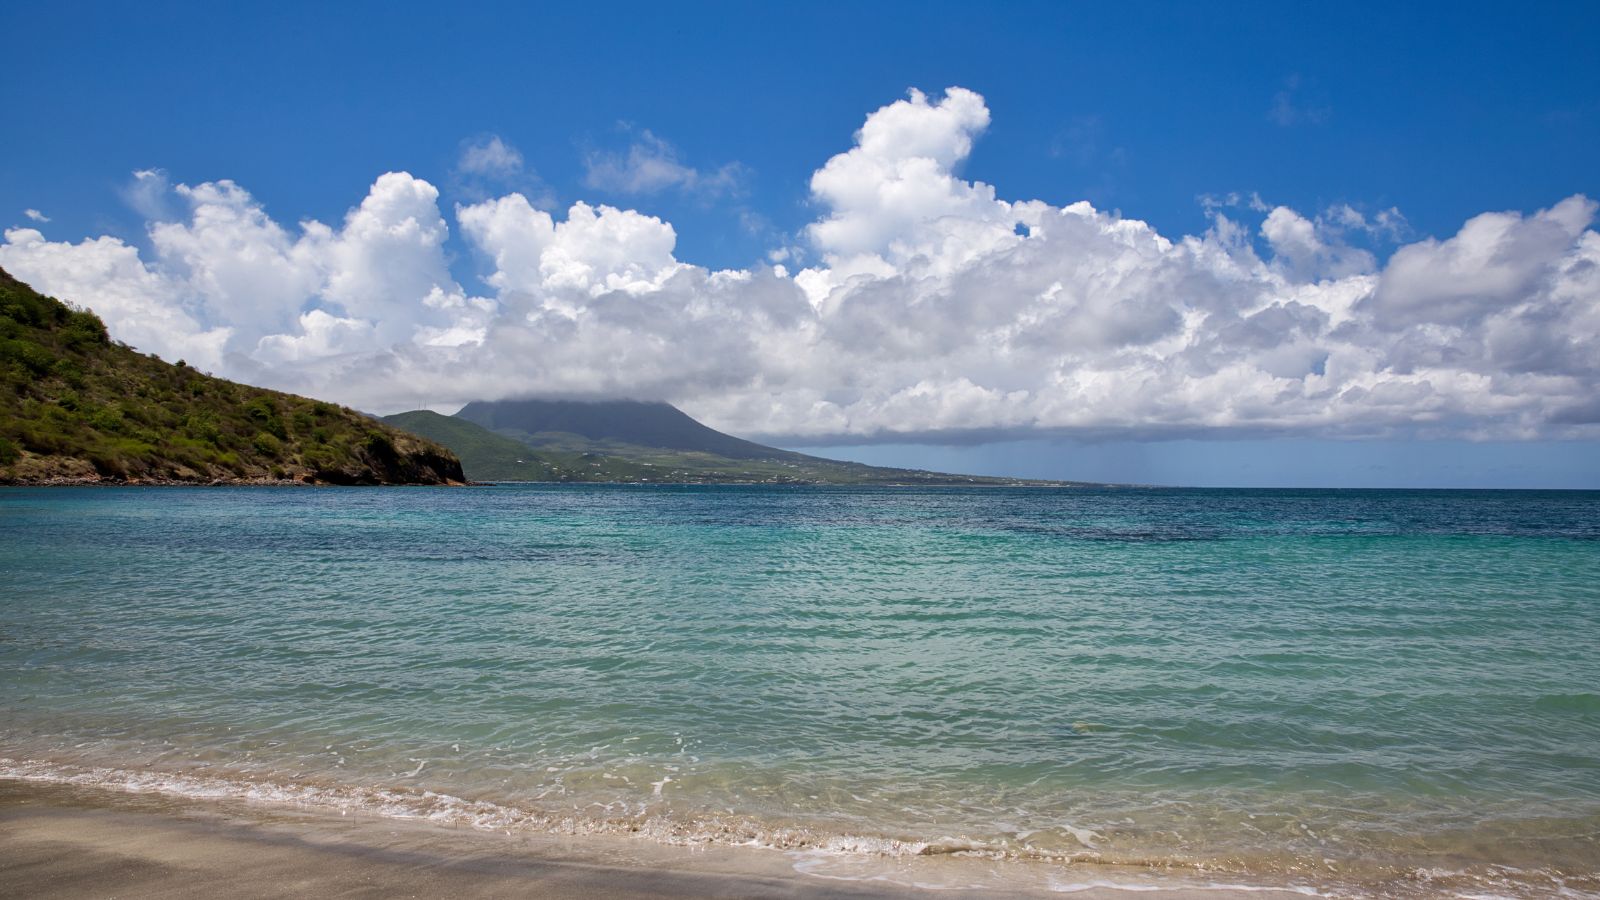 <p>Don’t overlook the pristine islands of St. Kitts and Nevis, just east of the U.S. Virgin Islands, when deciding on your next Caribbean vacation. From historical landmarks to snorkeling and diving, hiking, and a growing number of excellent resorts and hotels, these islands have plenty to offer travelers. Stay at <a href="https://www.hyatt.com/en-US/hotel/saint-kitts-and-nevis/park-hyatt-st-kitts/skbph">Park Hyatt St. Kitts Christophe Harbour</a> for white sand shores, luxe accommodations, and spectacular views of the volcanic cone on the island of Nevis from every corner of the resort.</p>